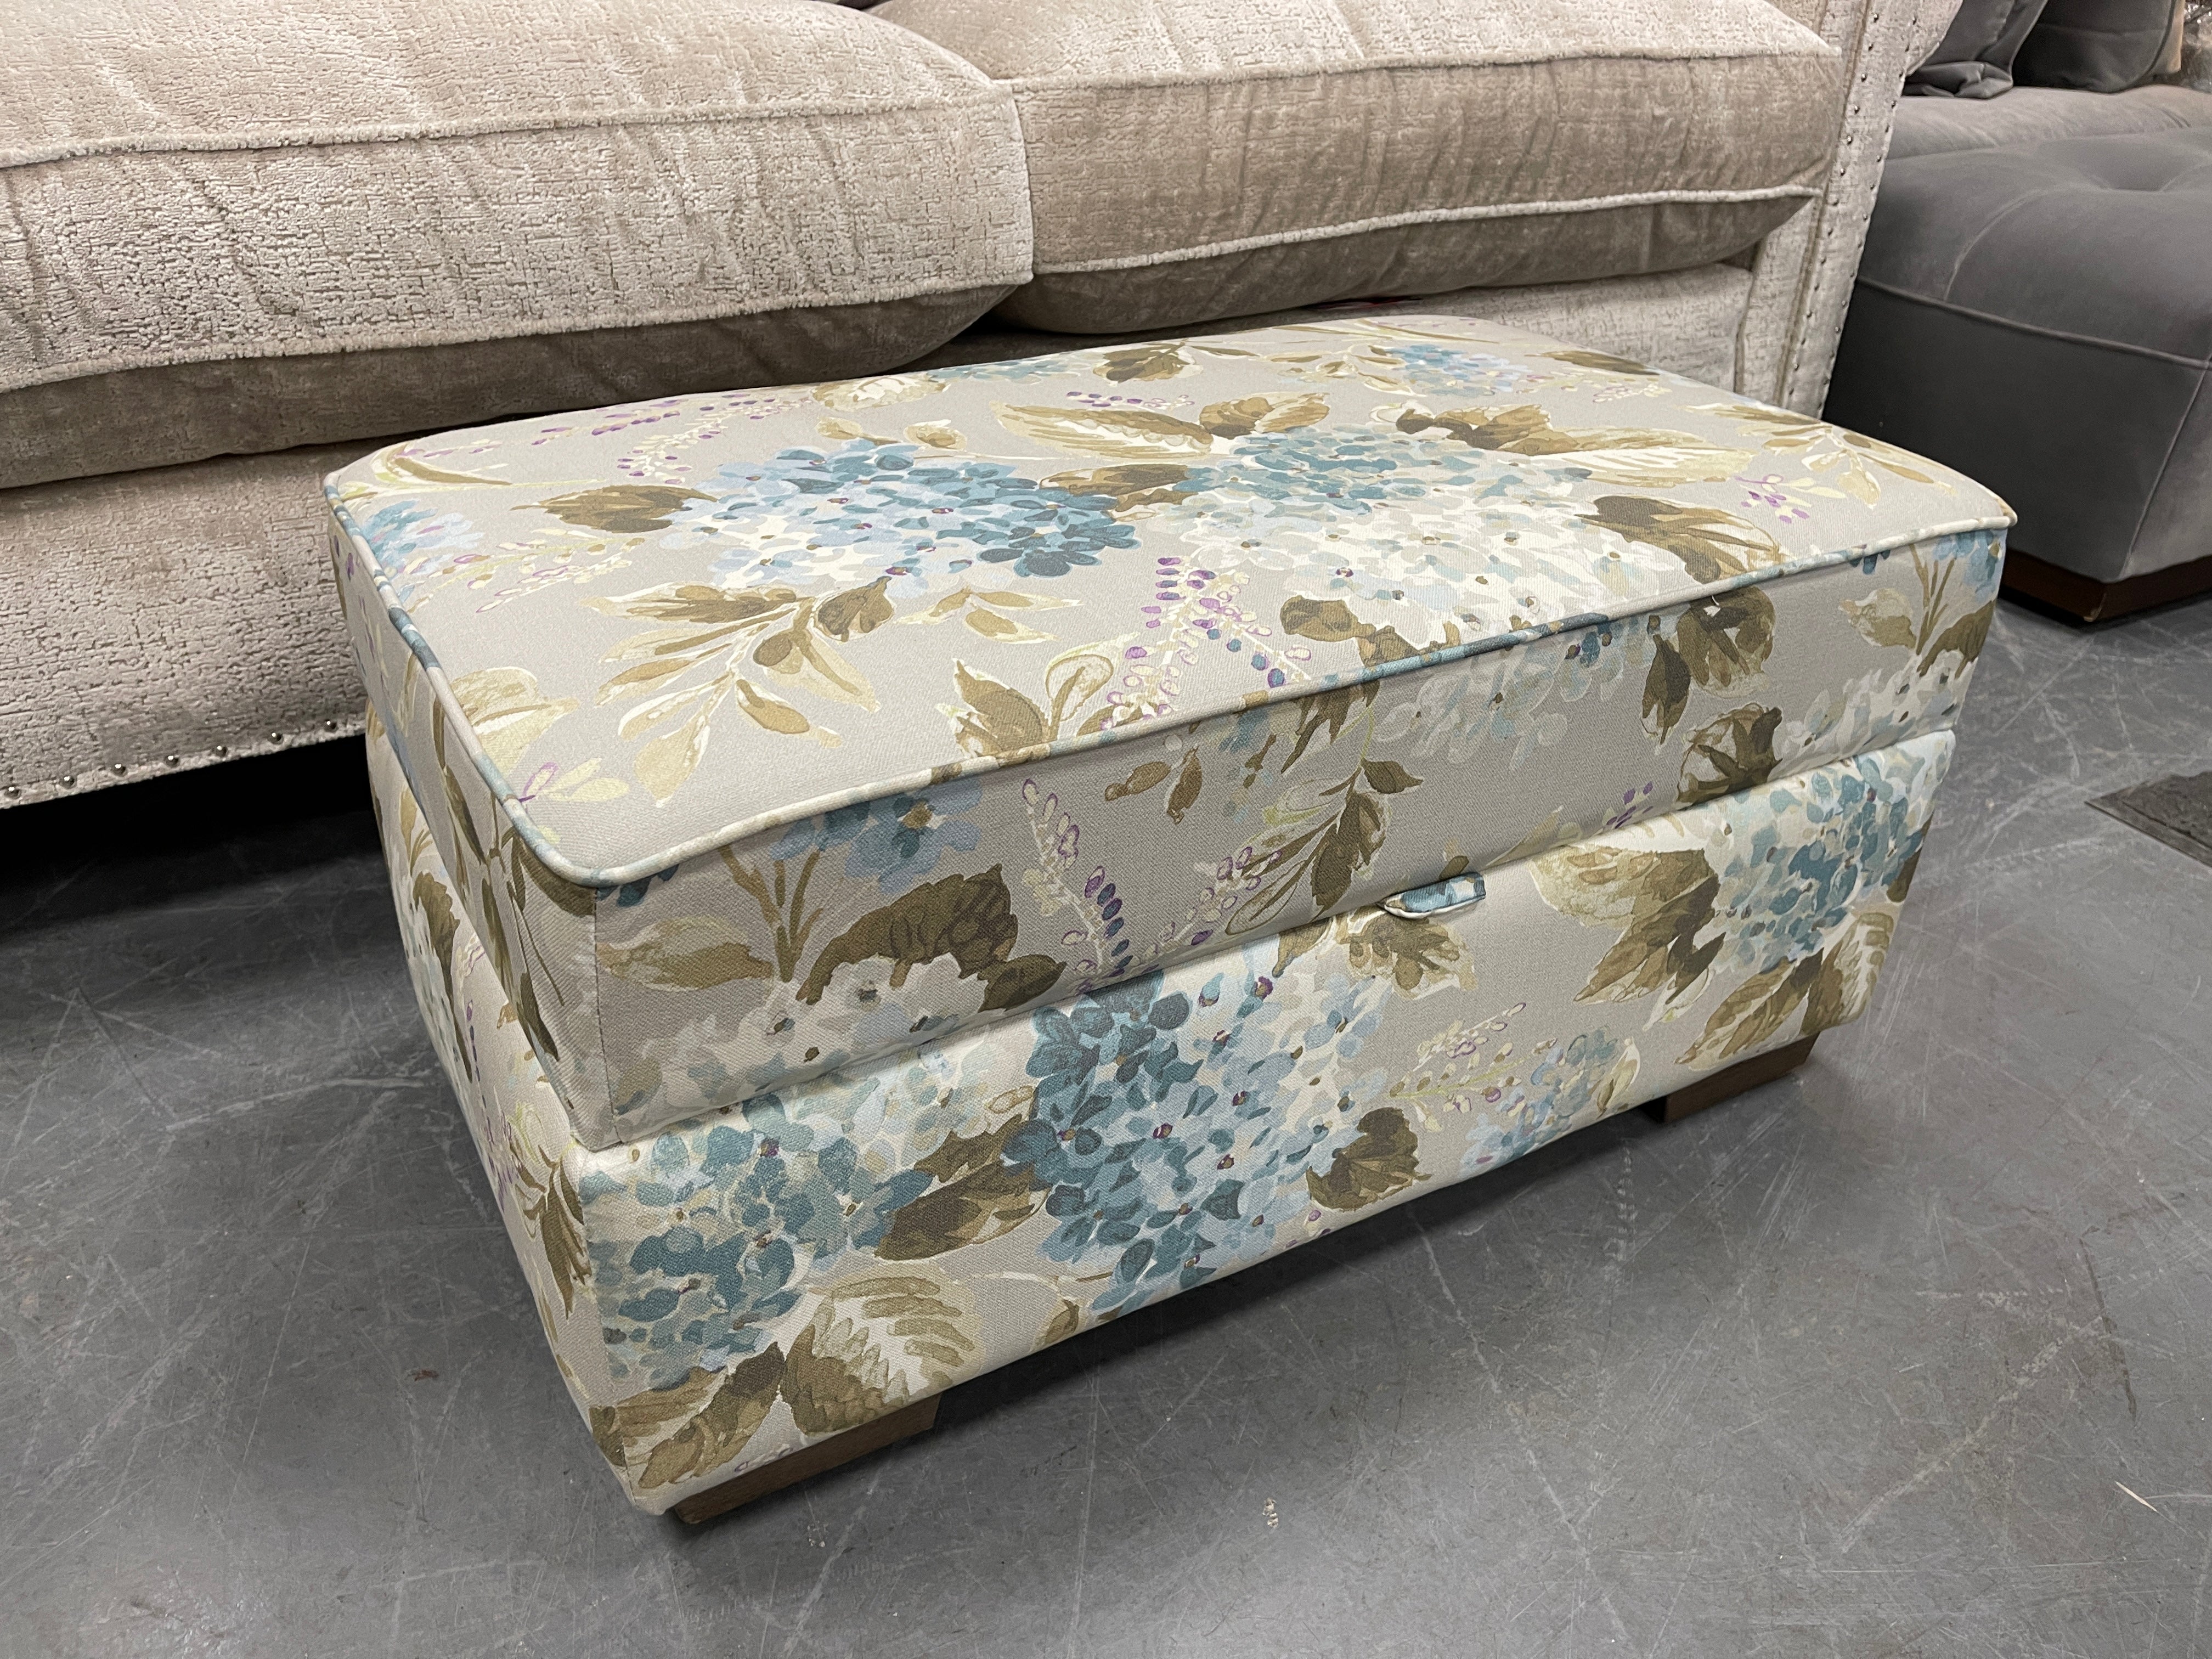 SOFOLOGY ARIANA storage footstool in floral linen fabric